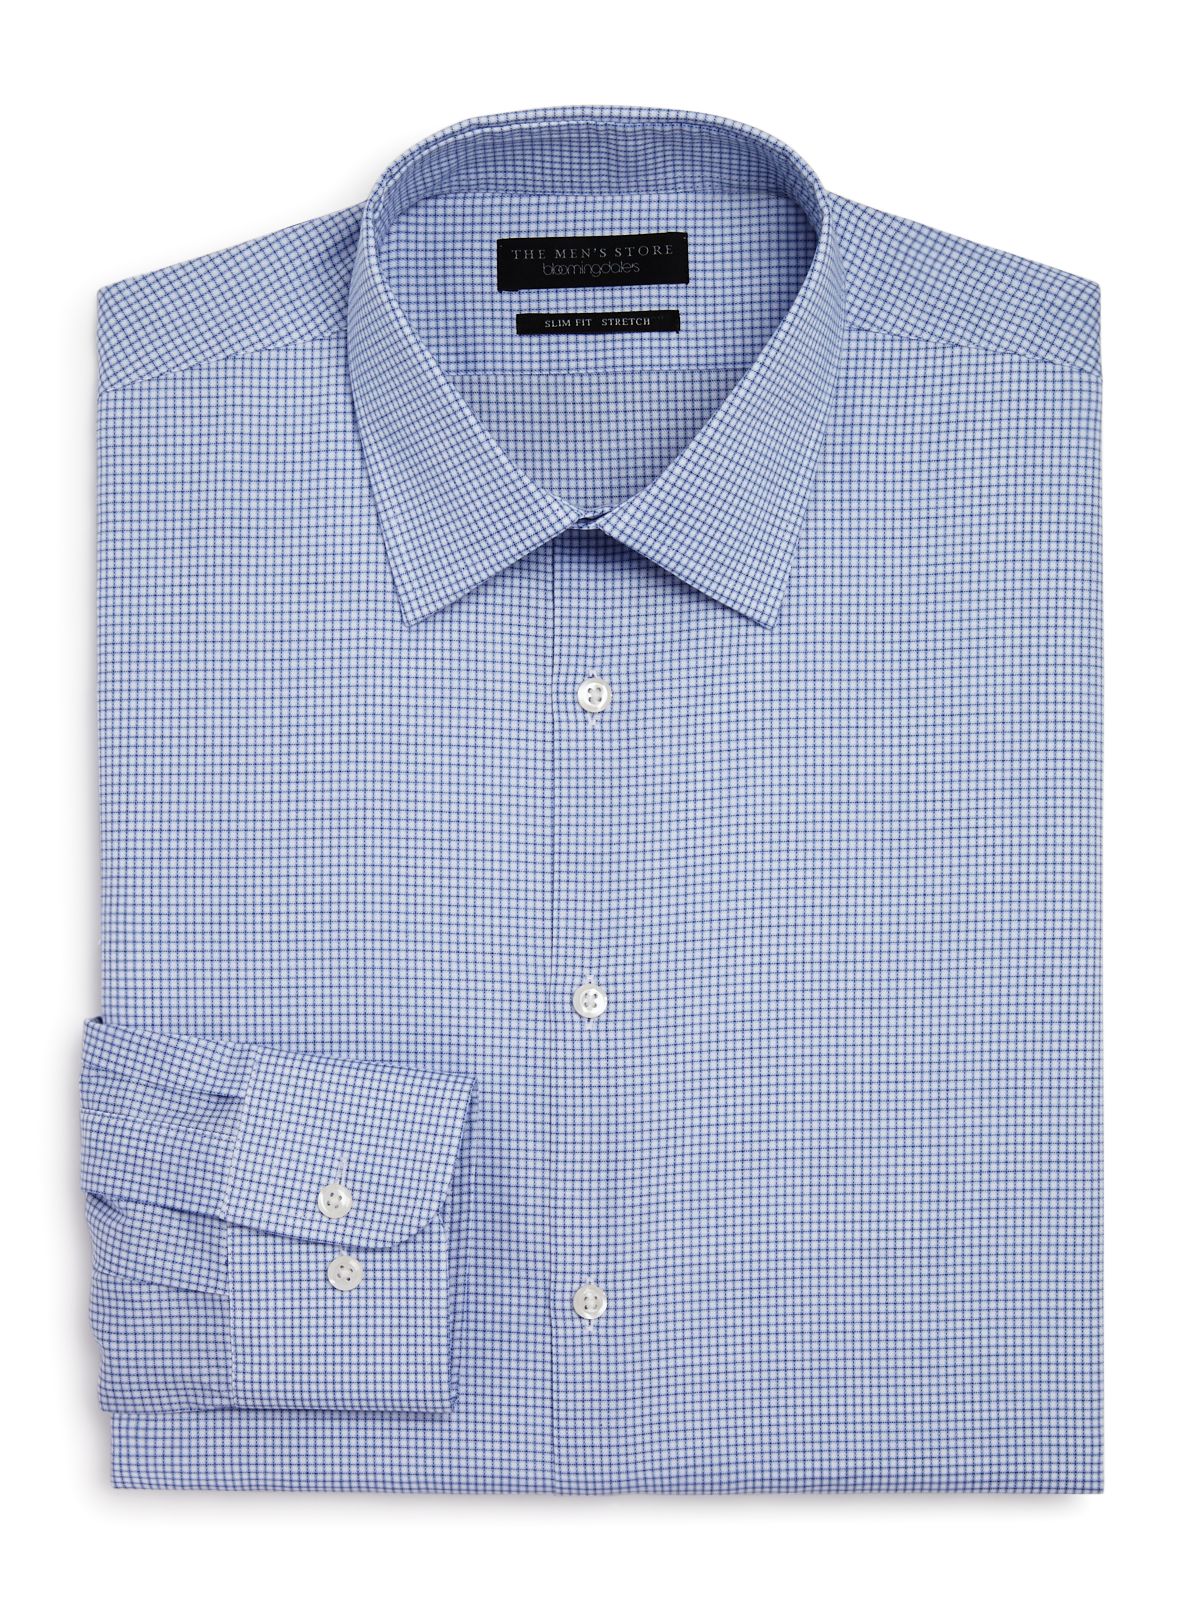 The Mens store Mens Light Blue Check Collared Classic Fit Dress Shirt 15.5